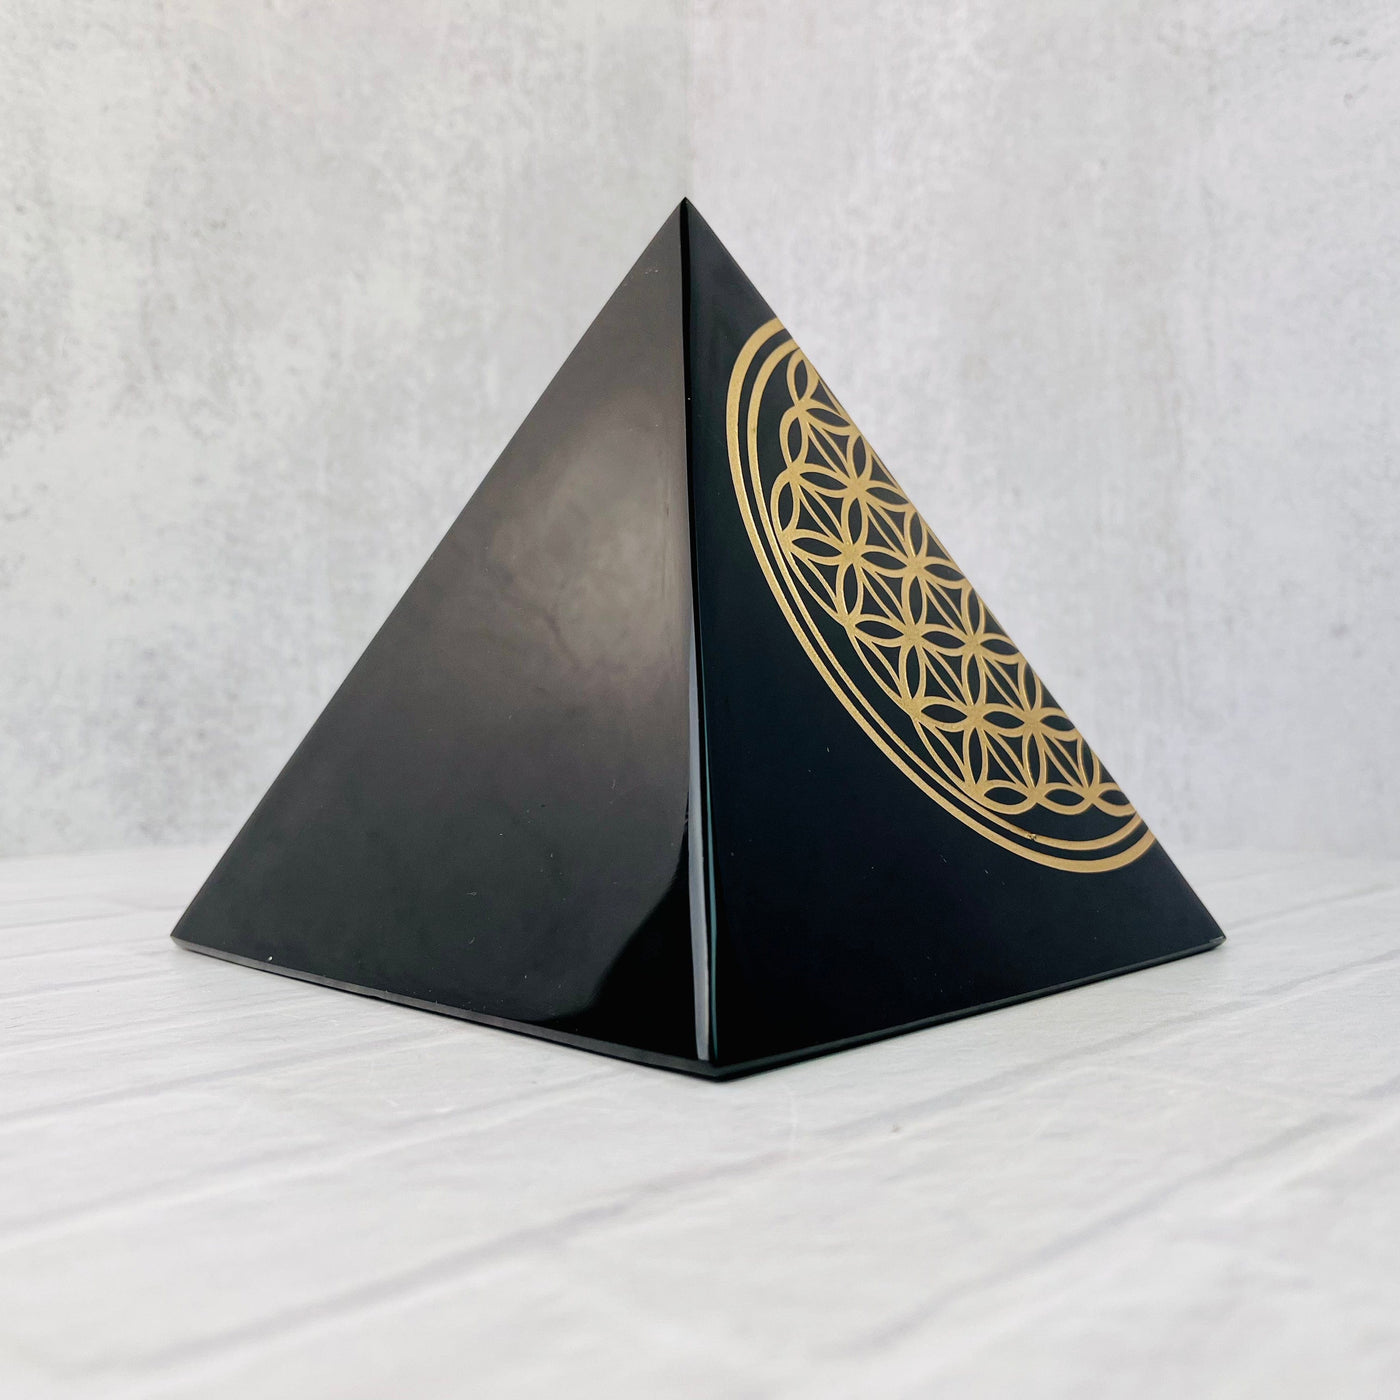 View of right side of Gold Sheen Obsidian Flower of Life Pyramid.